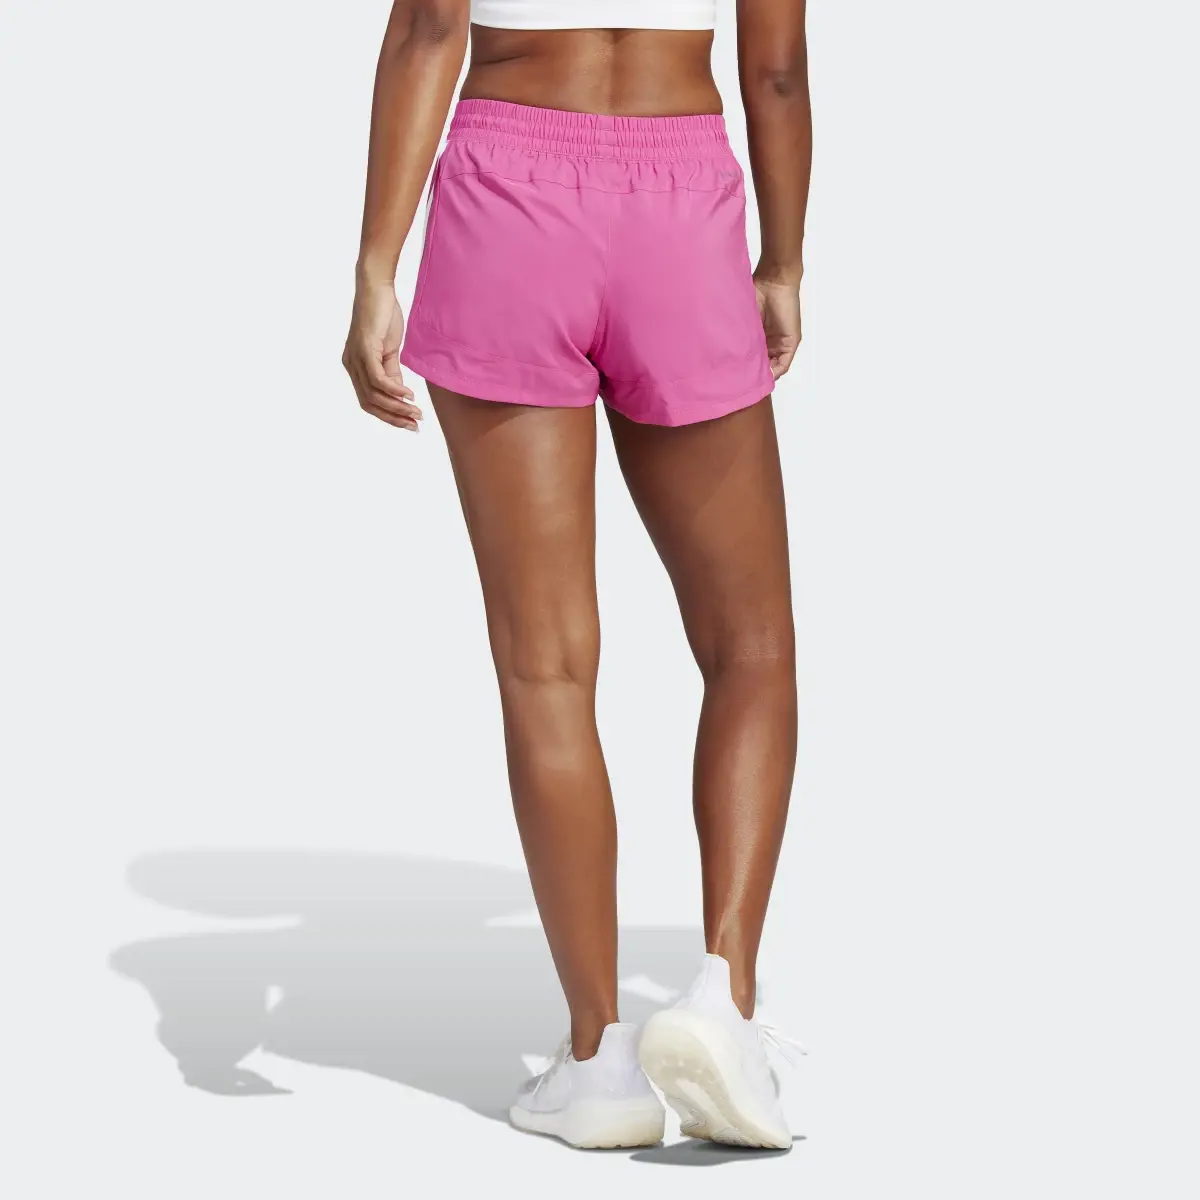 Adidas Pacer 3-Stripes Woven Shorts. 2